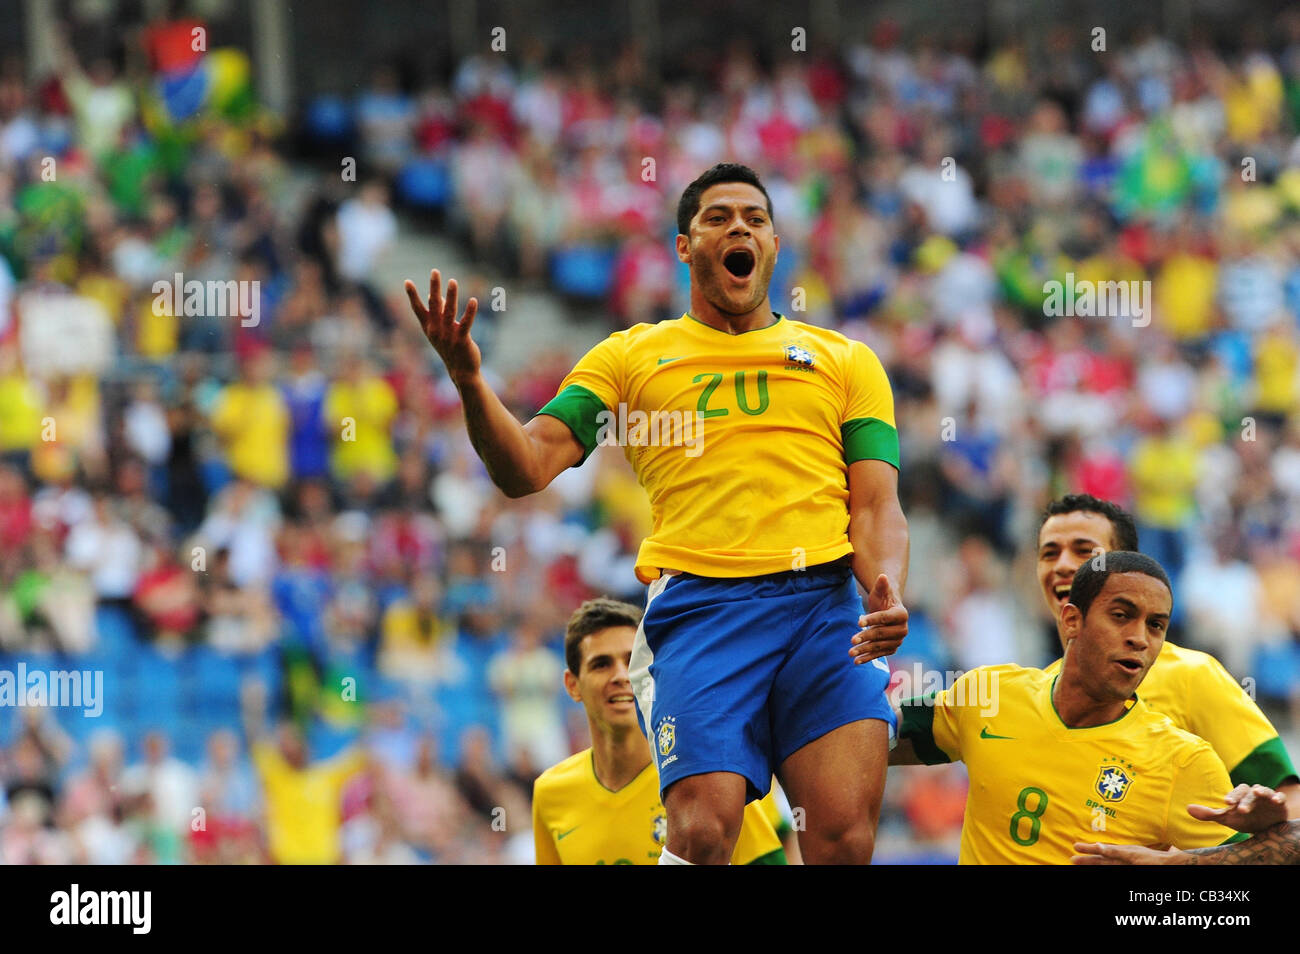 26.05.2012. Hamburg, Germany.  Brazil's Hulk cheers after scoring the 1-0 goal during the international friendly soccer match between Denmark and Brazil at Imtech Arena in Hamburg, Germany, 26 may 2012. Stock Photo